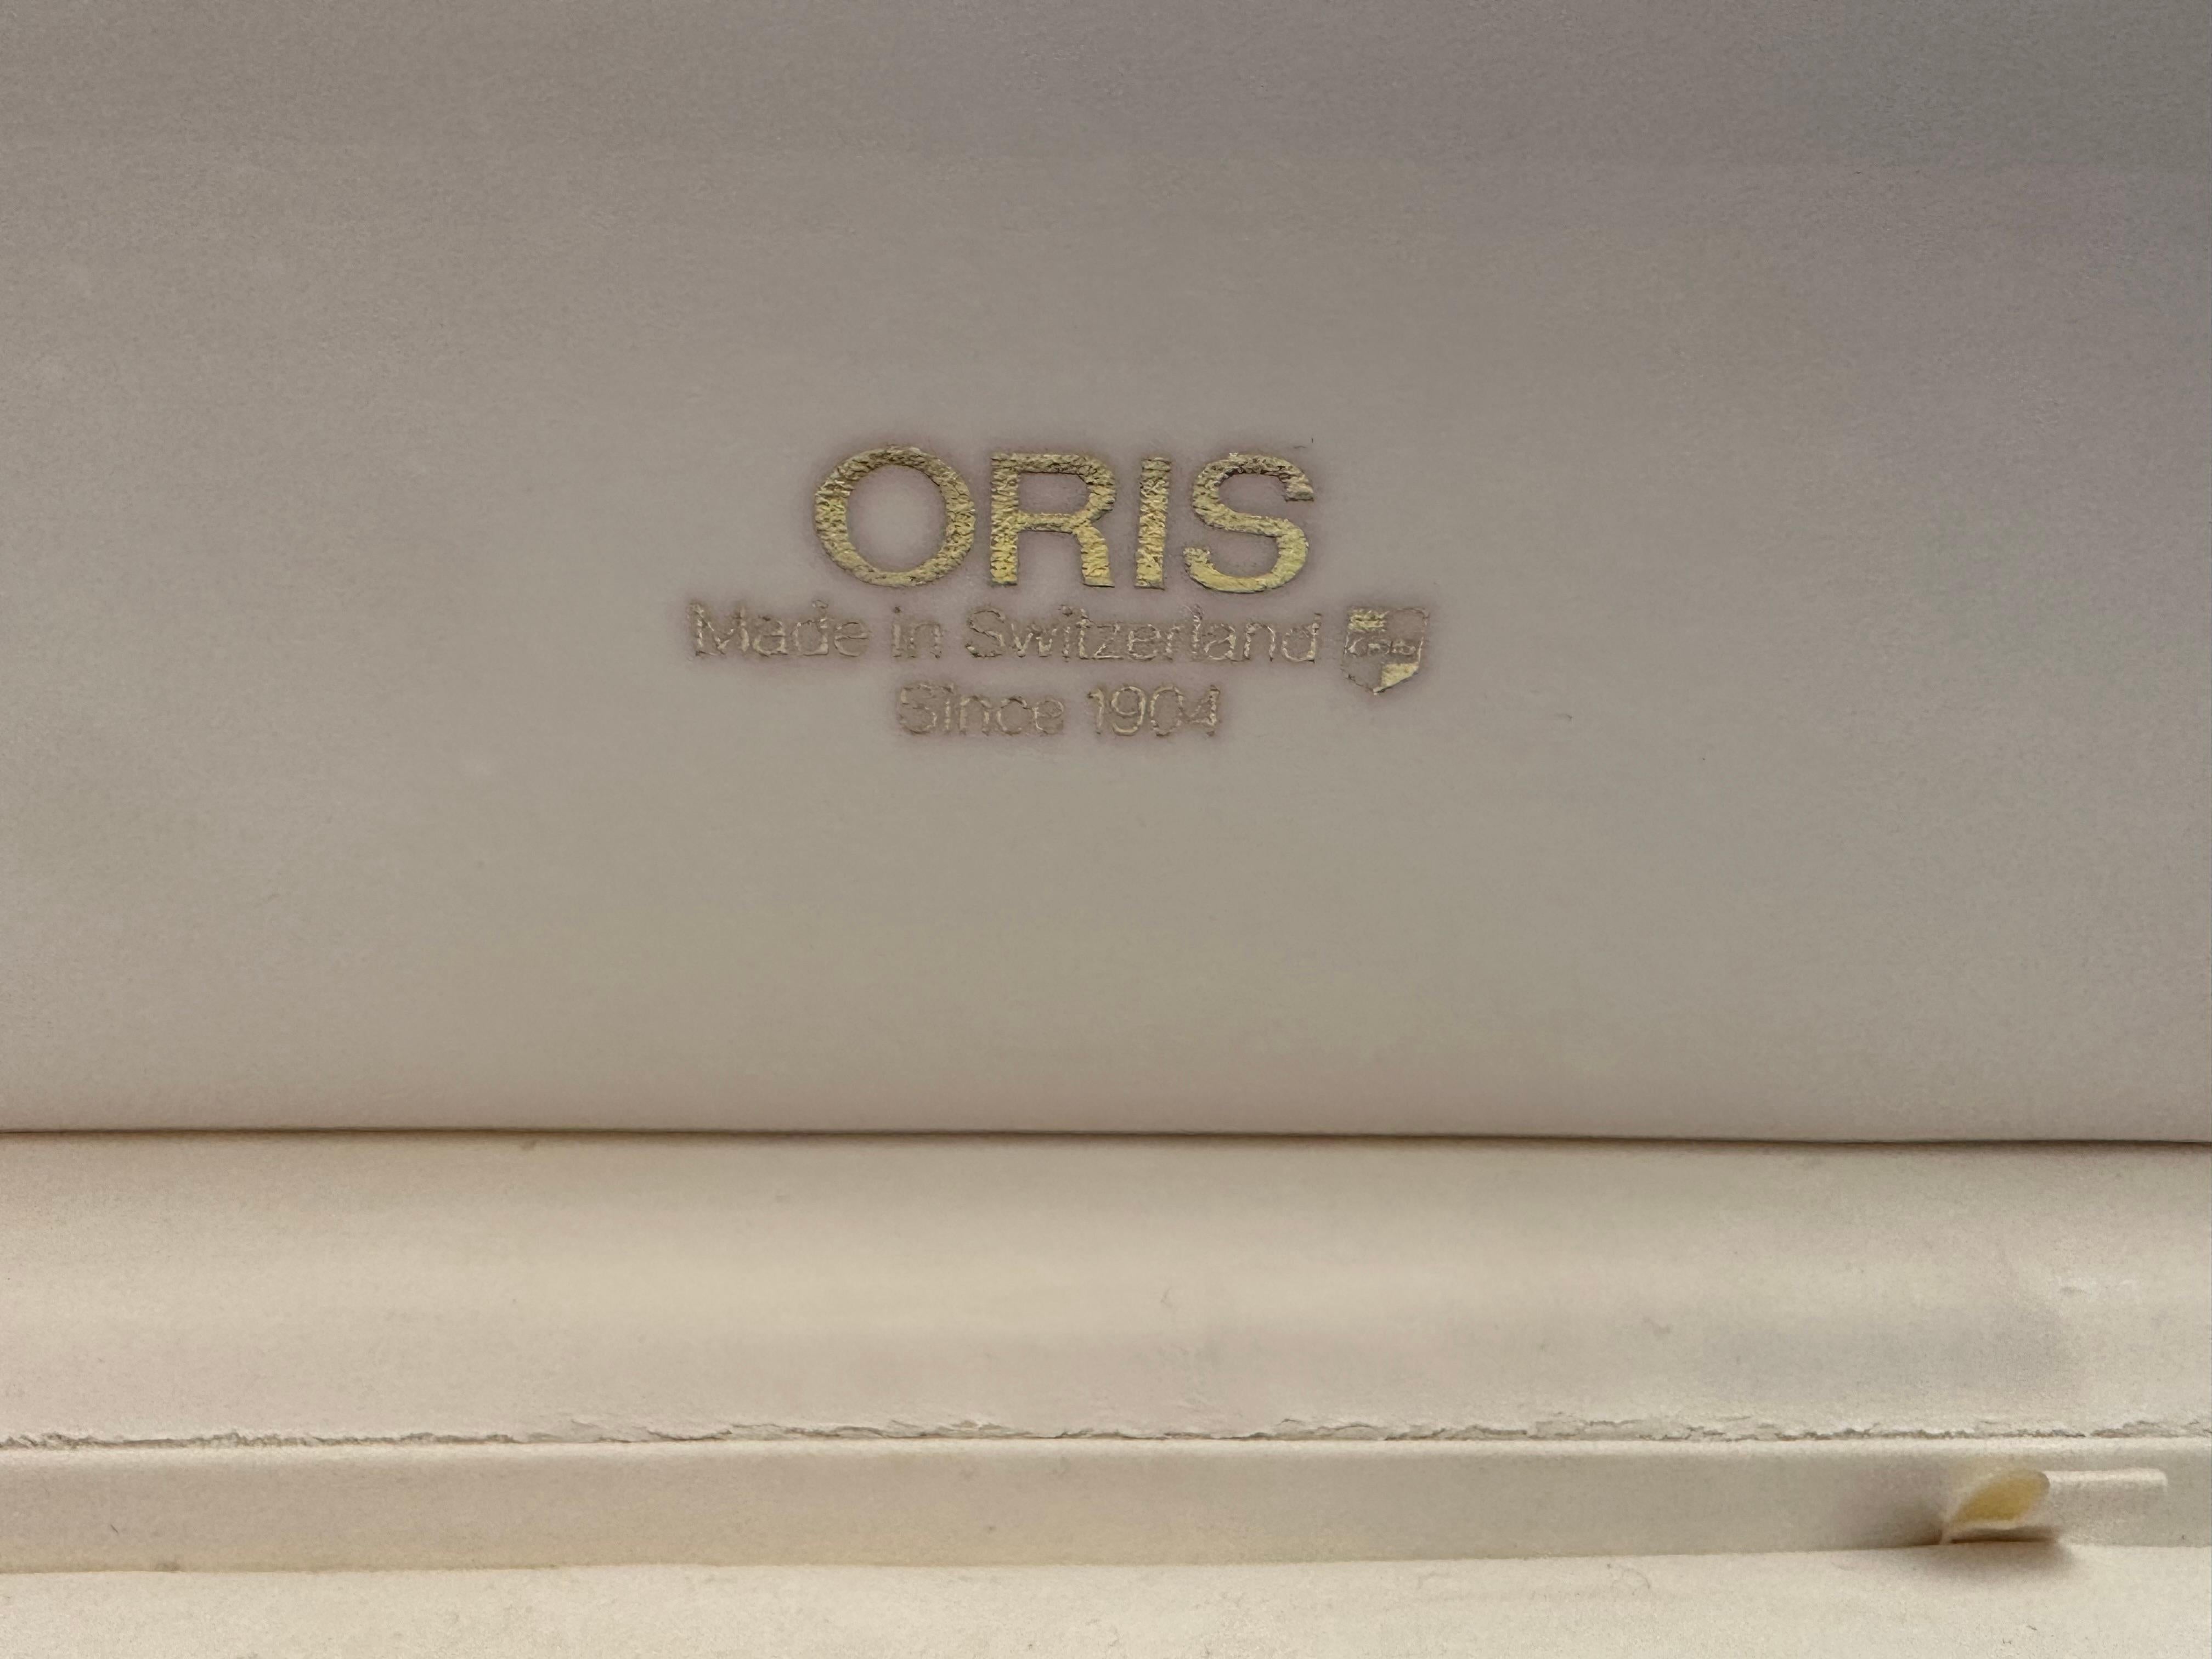 Oris Reveil Limited Edition Mechanical Alarm 18kt Gold, New with Box & Papers For Sale 10